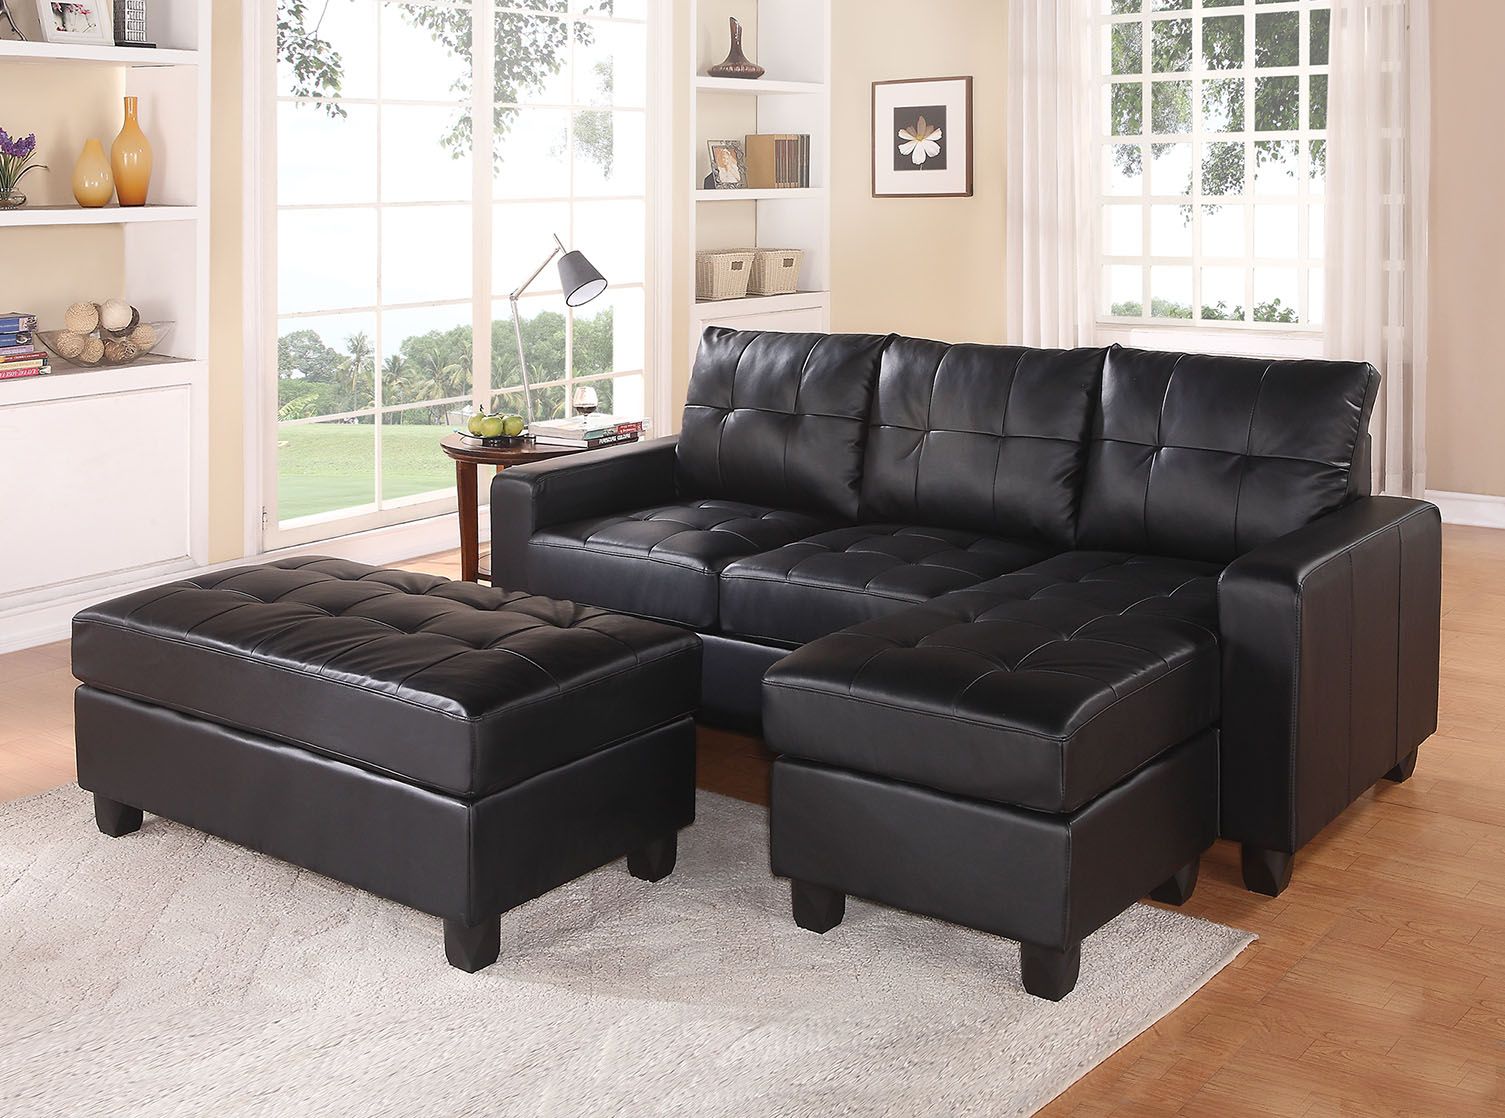 ACME Furniture Sectional Sofas - Lyssa Sectional Sofa w/Ottoman, Black Bonded Leather Match